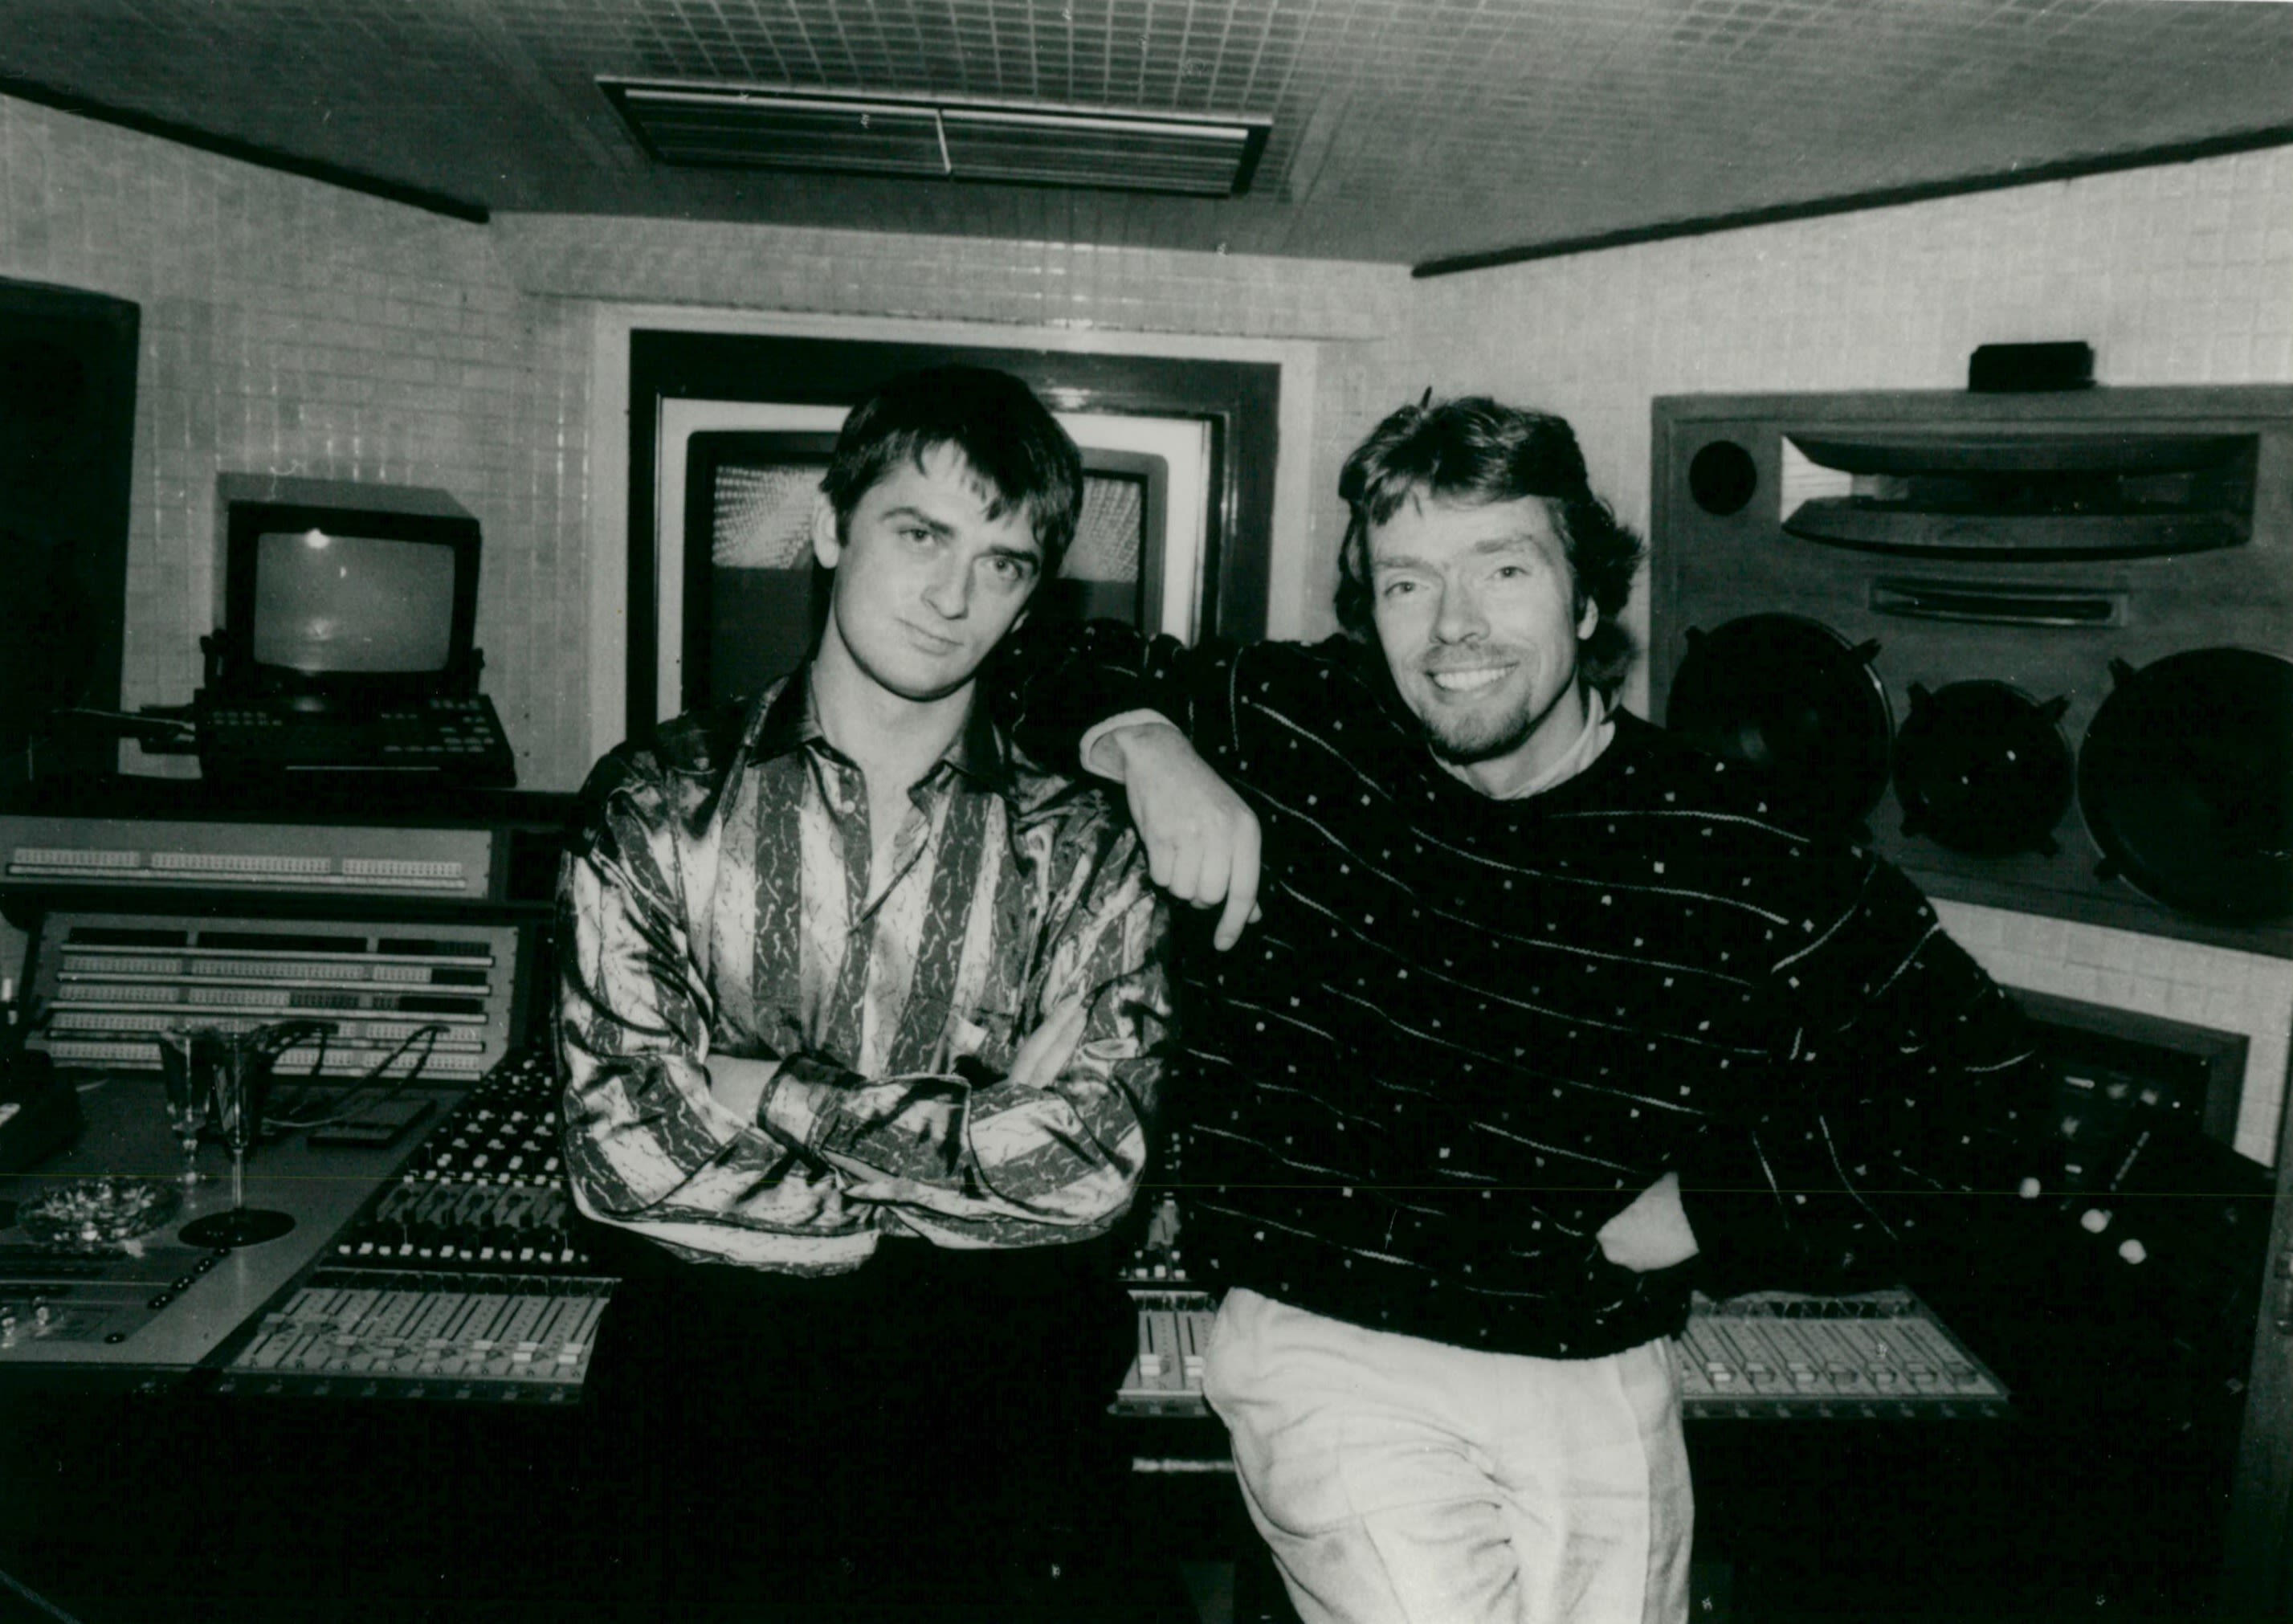 Mike Oldfield (left) and Richard Branson in The Manor recording studio in the 1970s